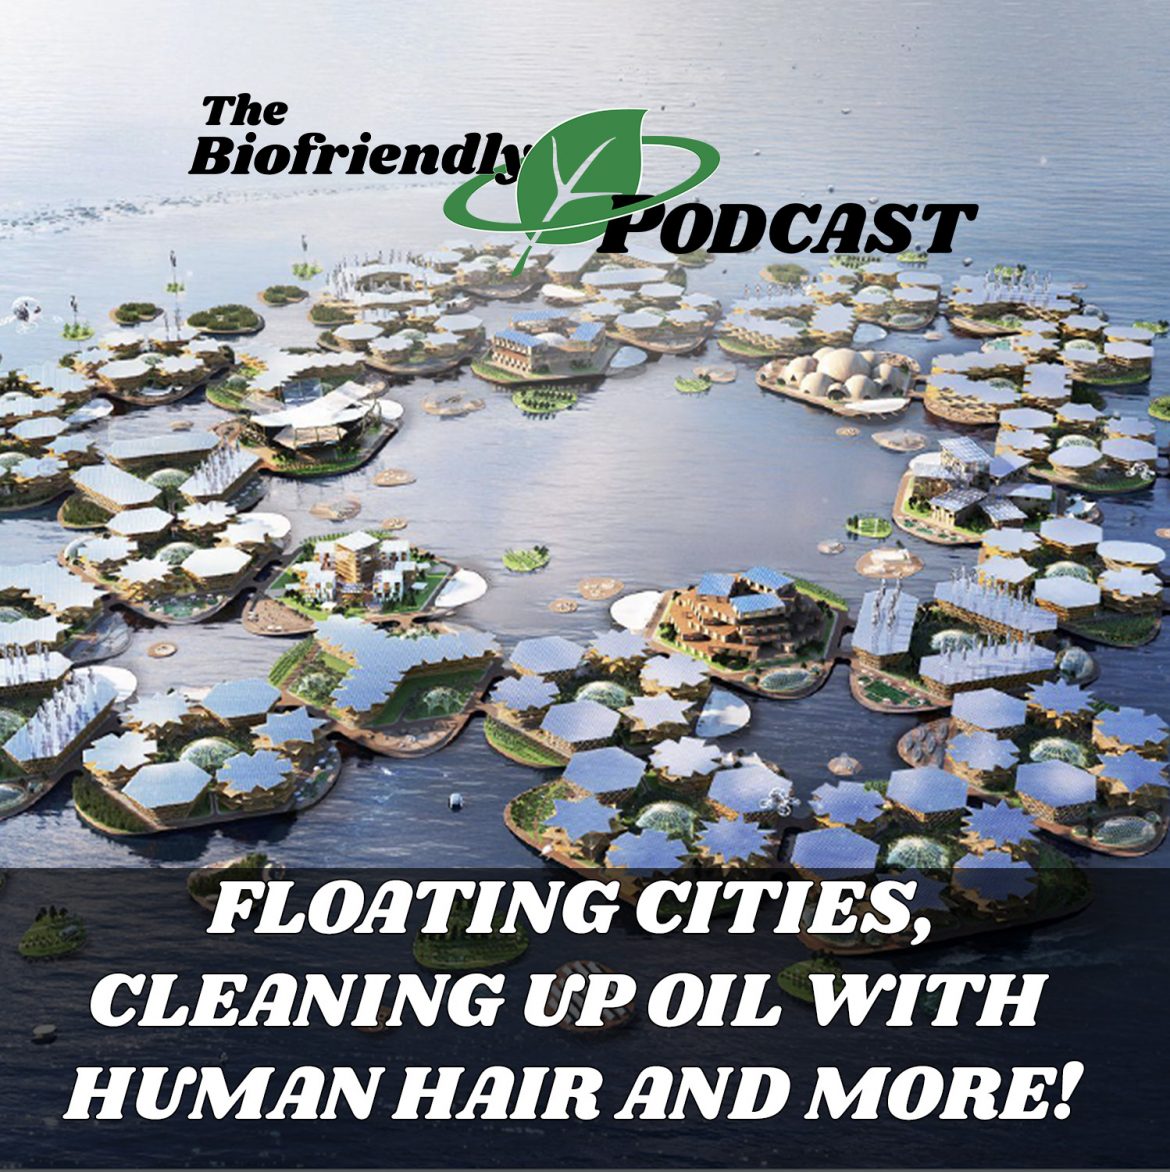 Floating Cities, Cleaning Up Oil with Human Hair and More!